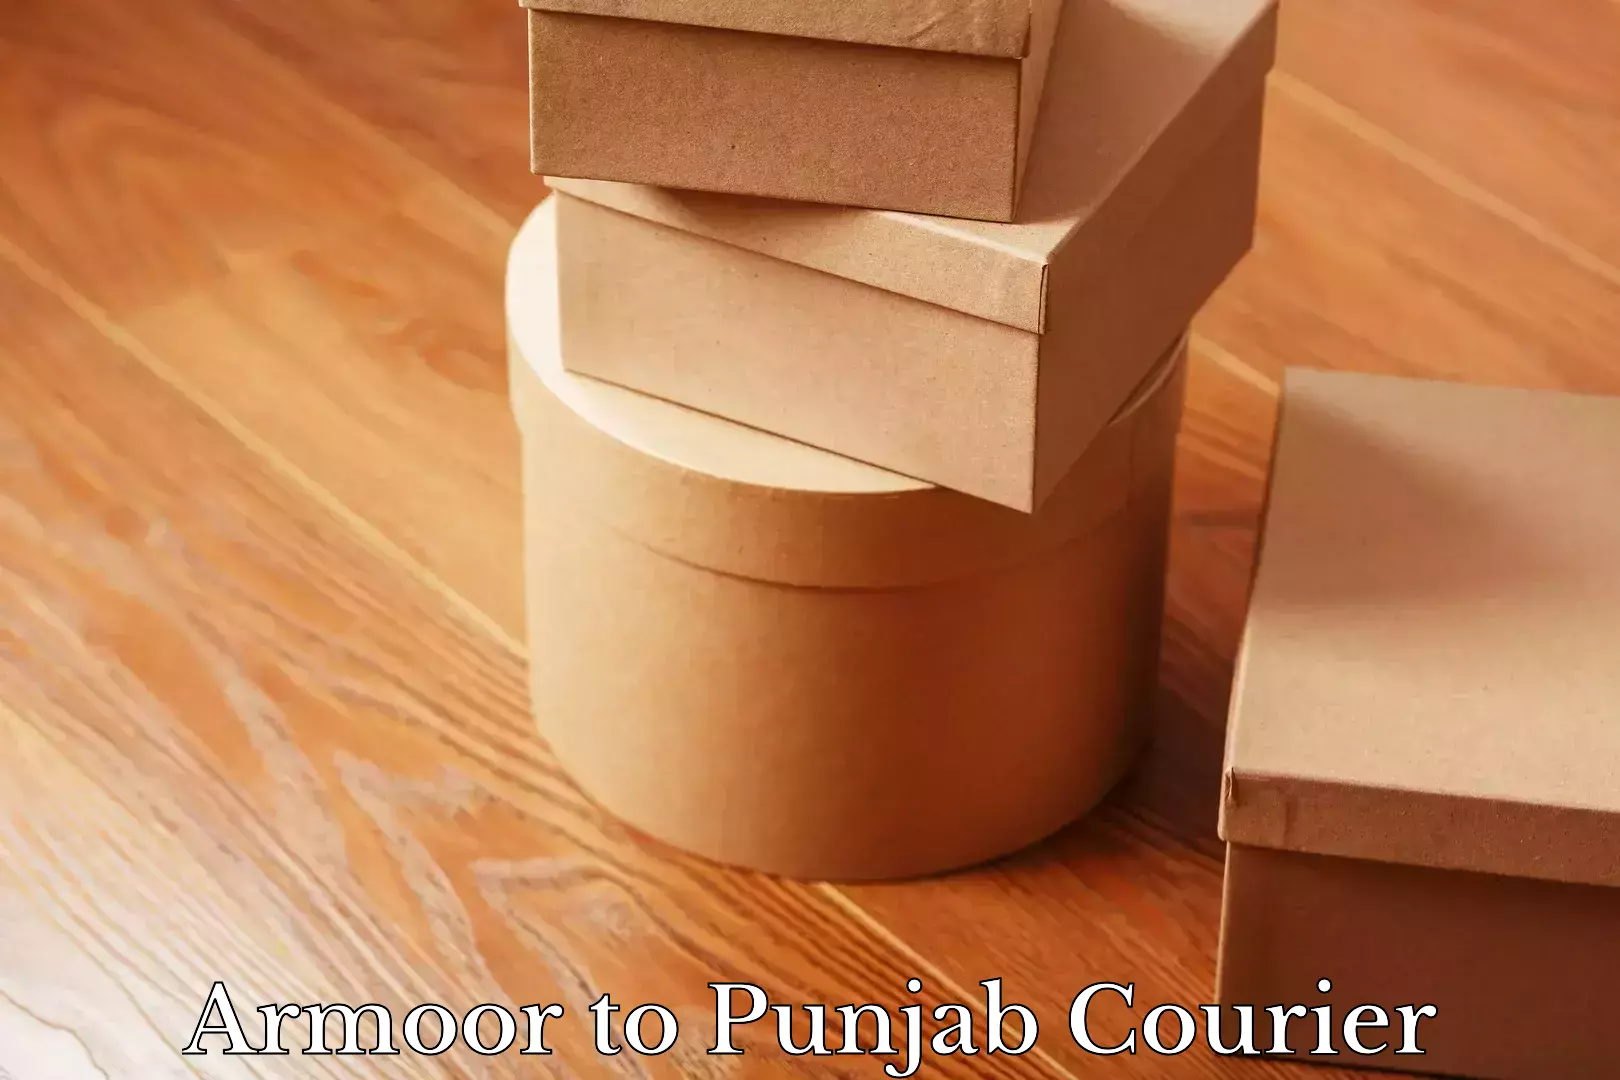 Express delivery capabilities Armoor to Punjab